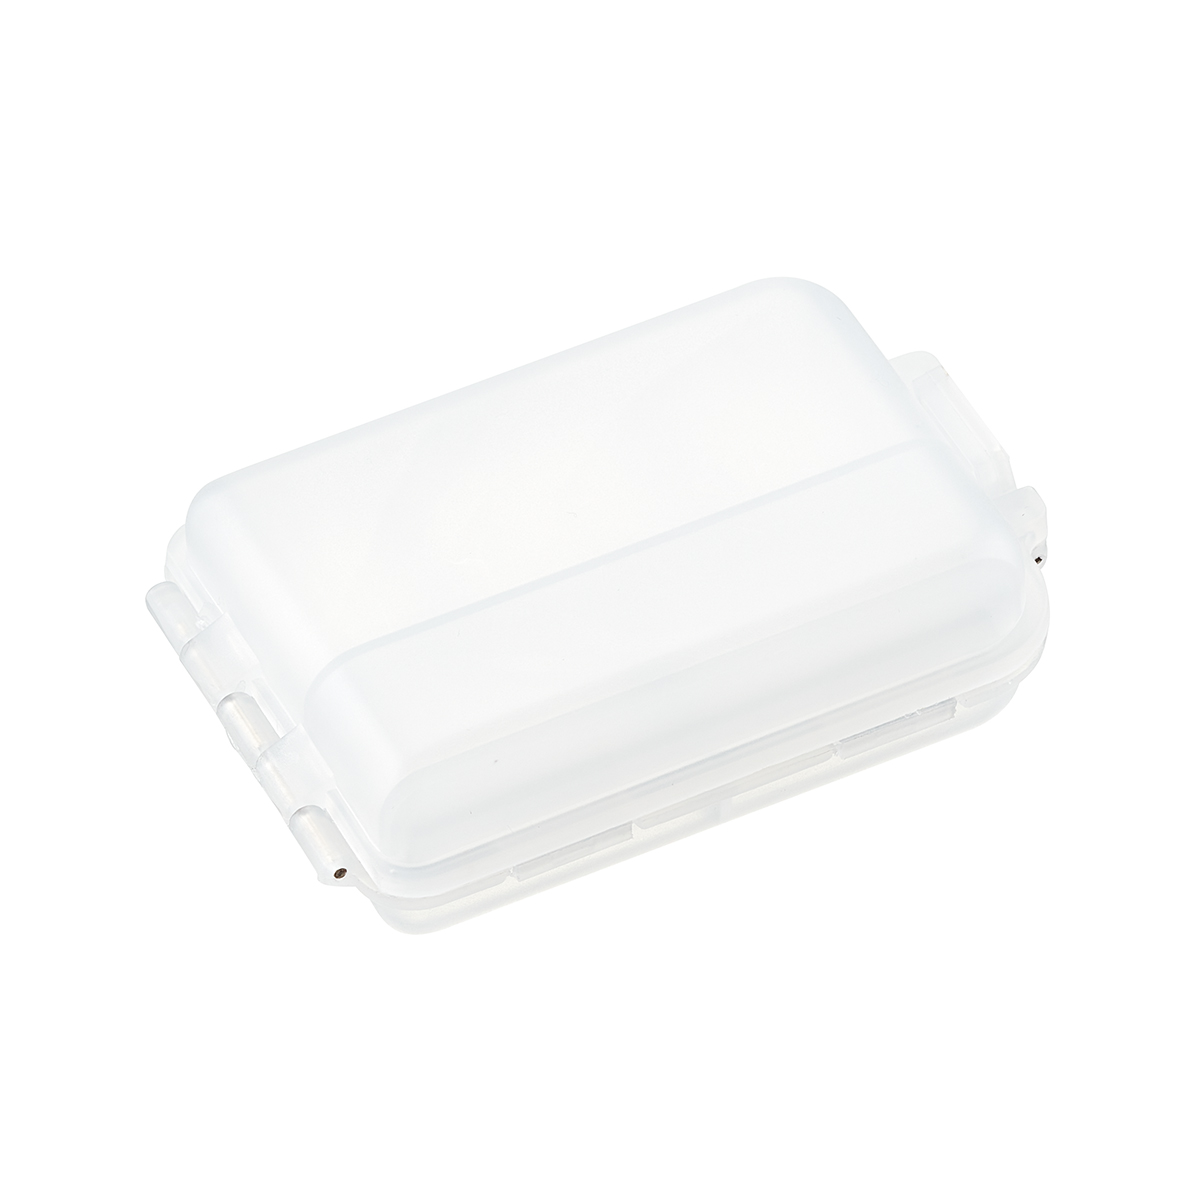 https://www.containerstore.com/catalogimages/473981/10054687-double-sided-pill-box-trans.jpg